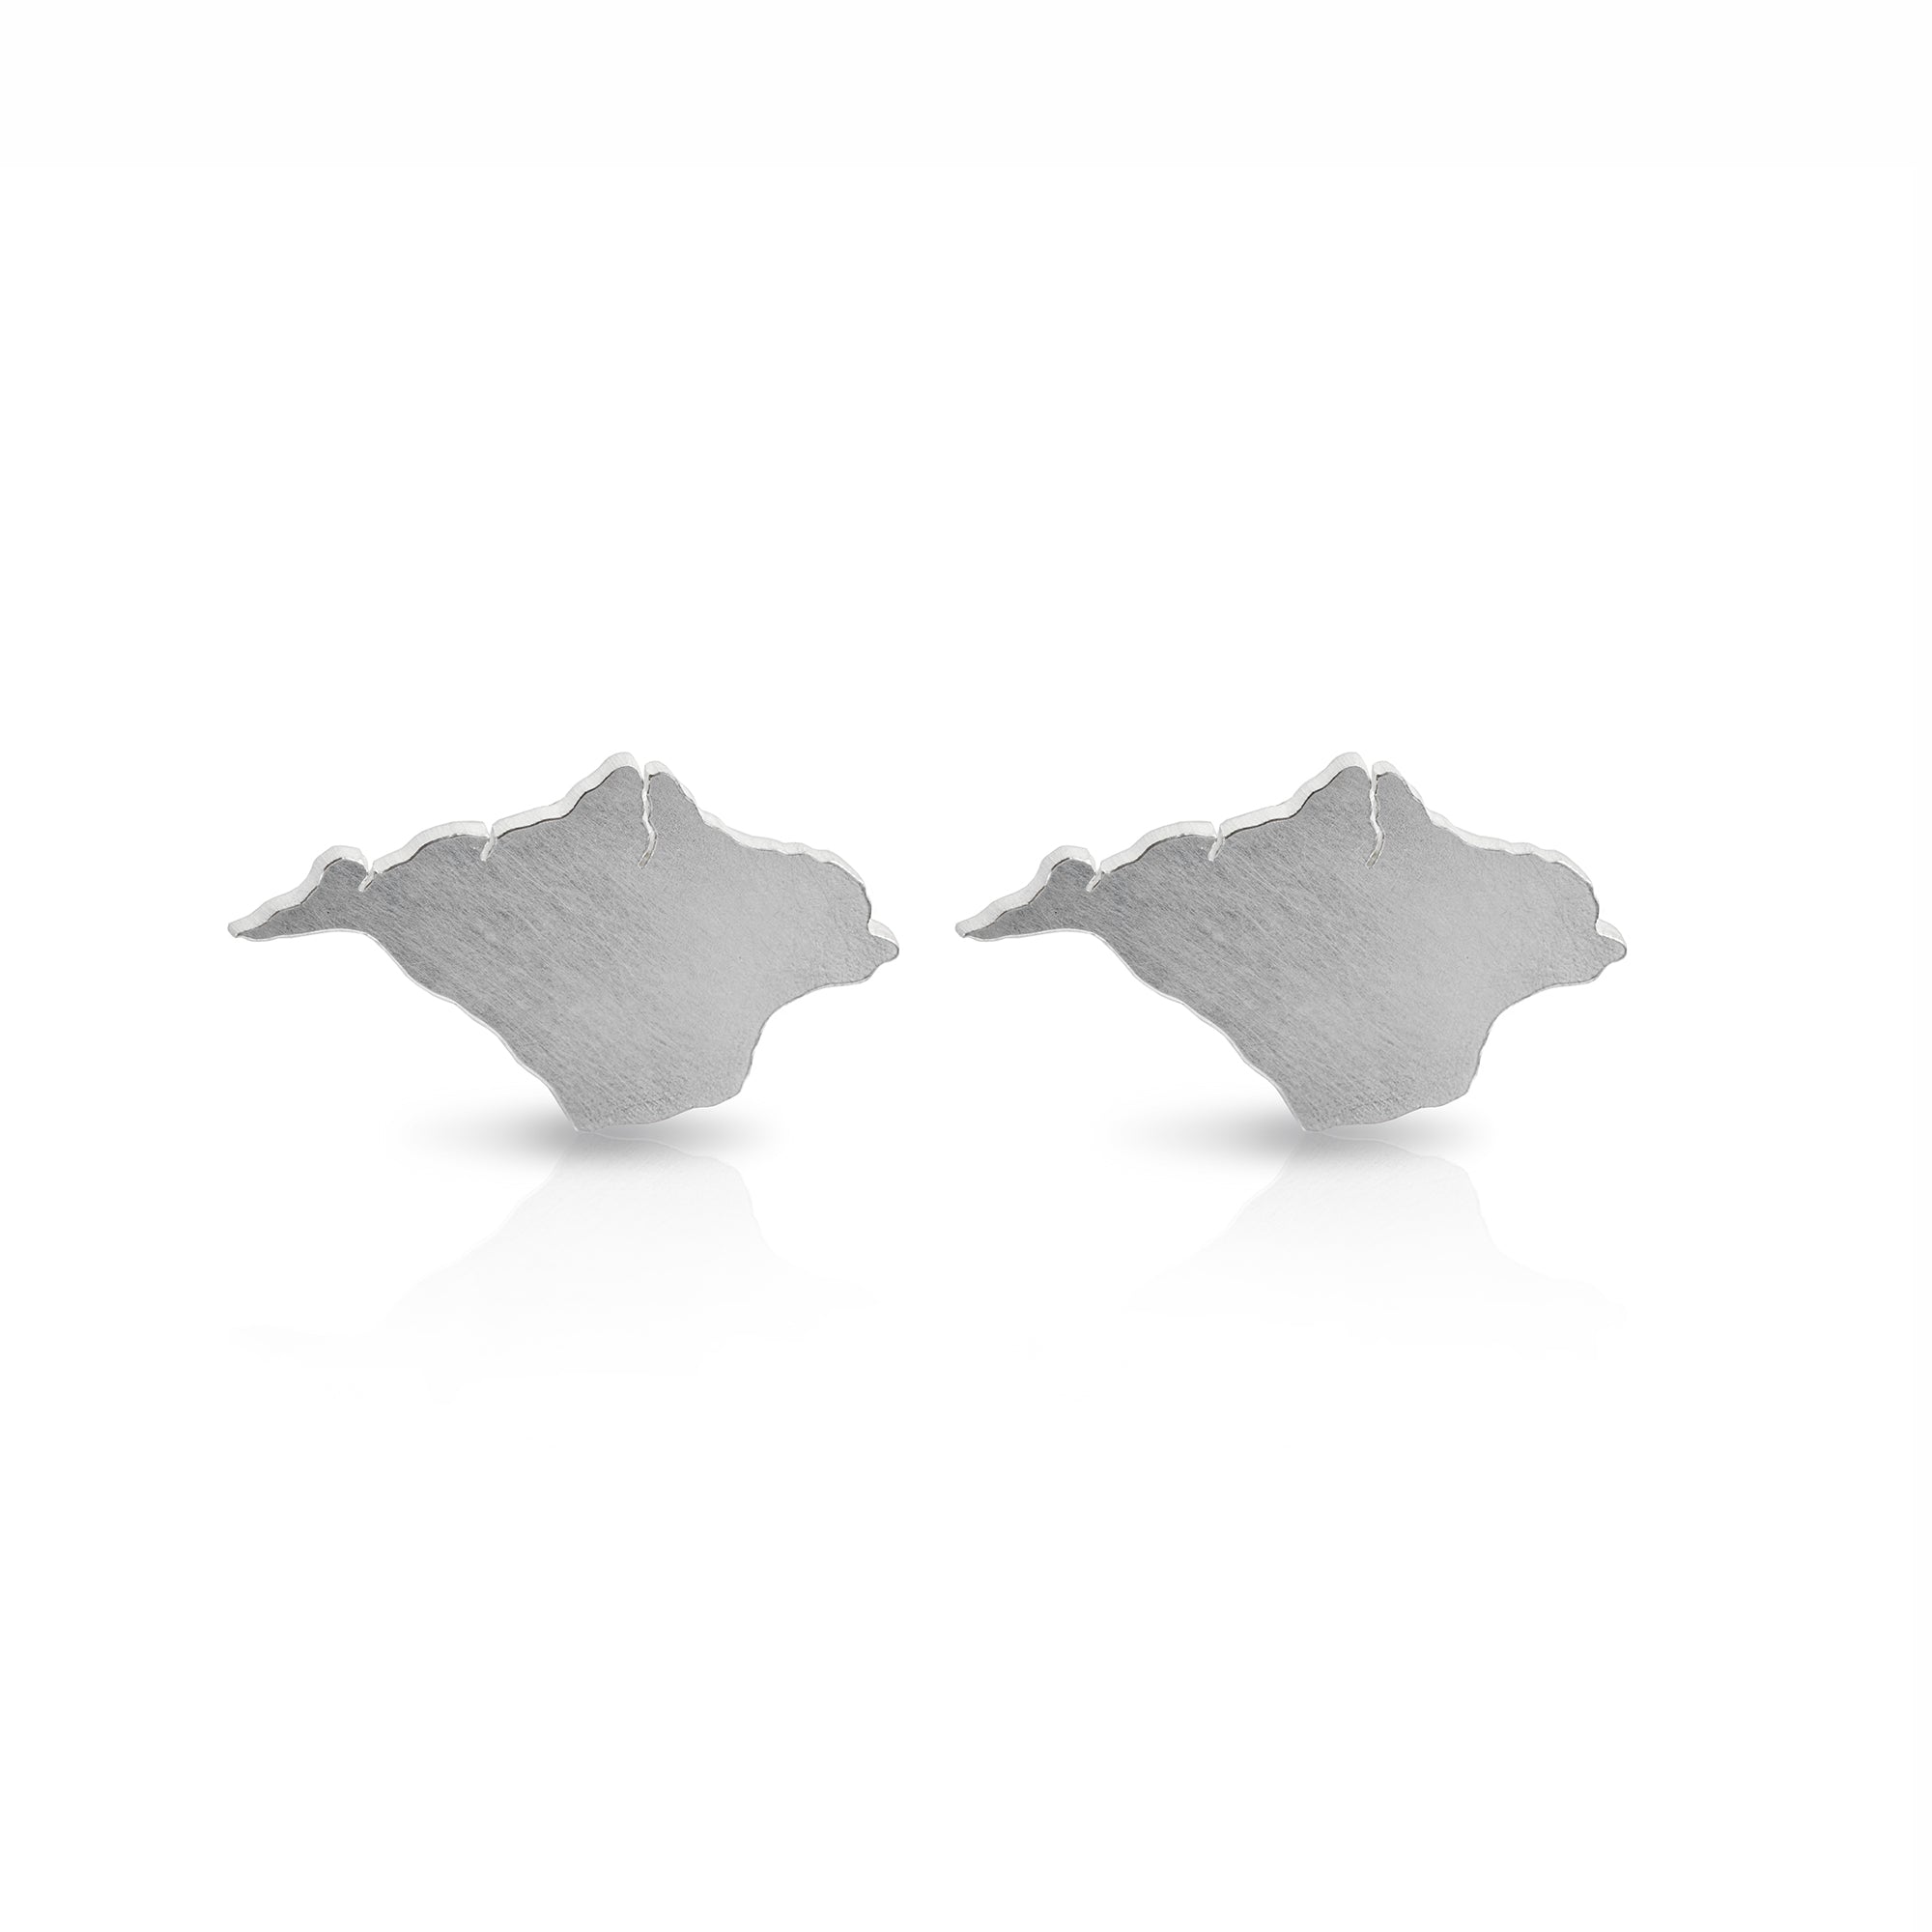 Isle of Wight earrings shown on a white background